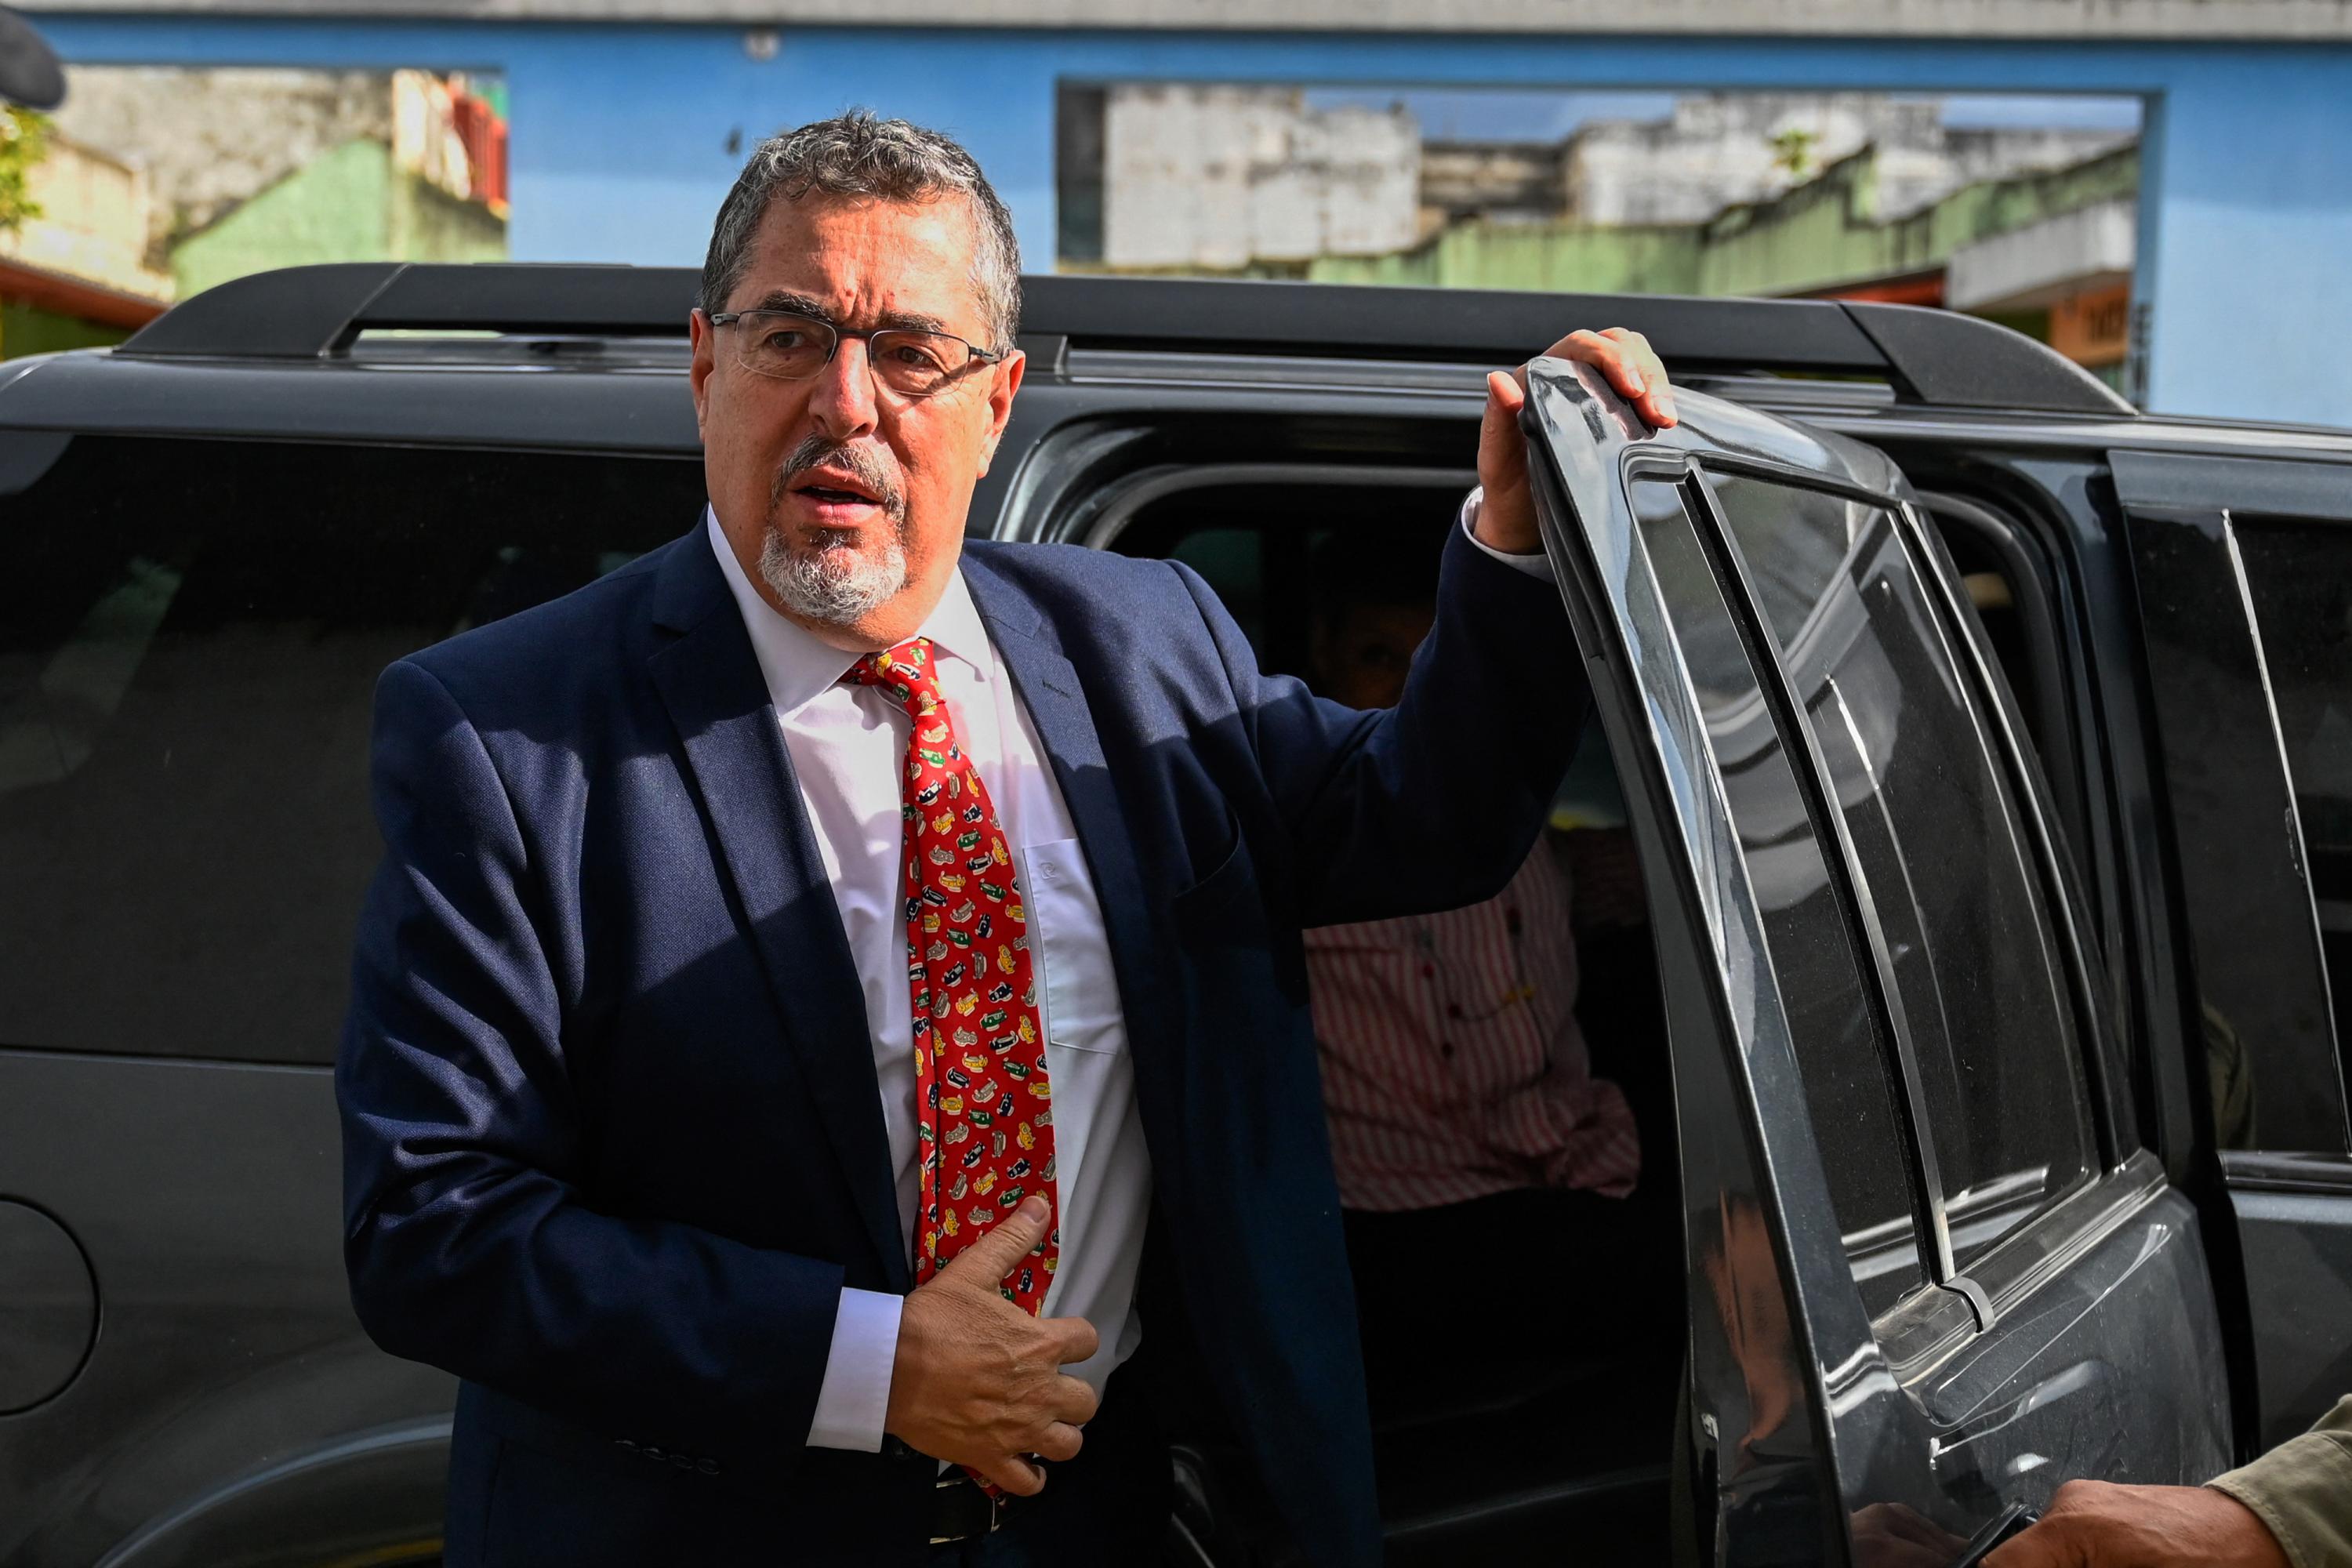 Bernardo Arévalo obtained second place in Guatemala’s June 2025 election. The Supreme Electoral Tribunal certified the results, whereas a criminal court suspended the “legal incorporation” of his party, the Semilla Movement. Photo Johan Ordóñez/AFP